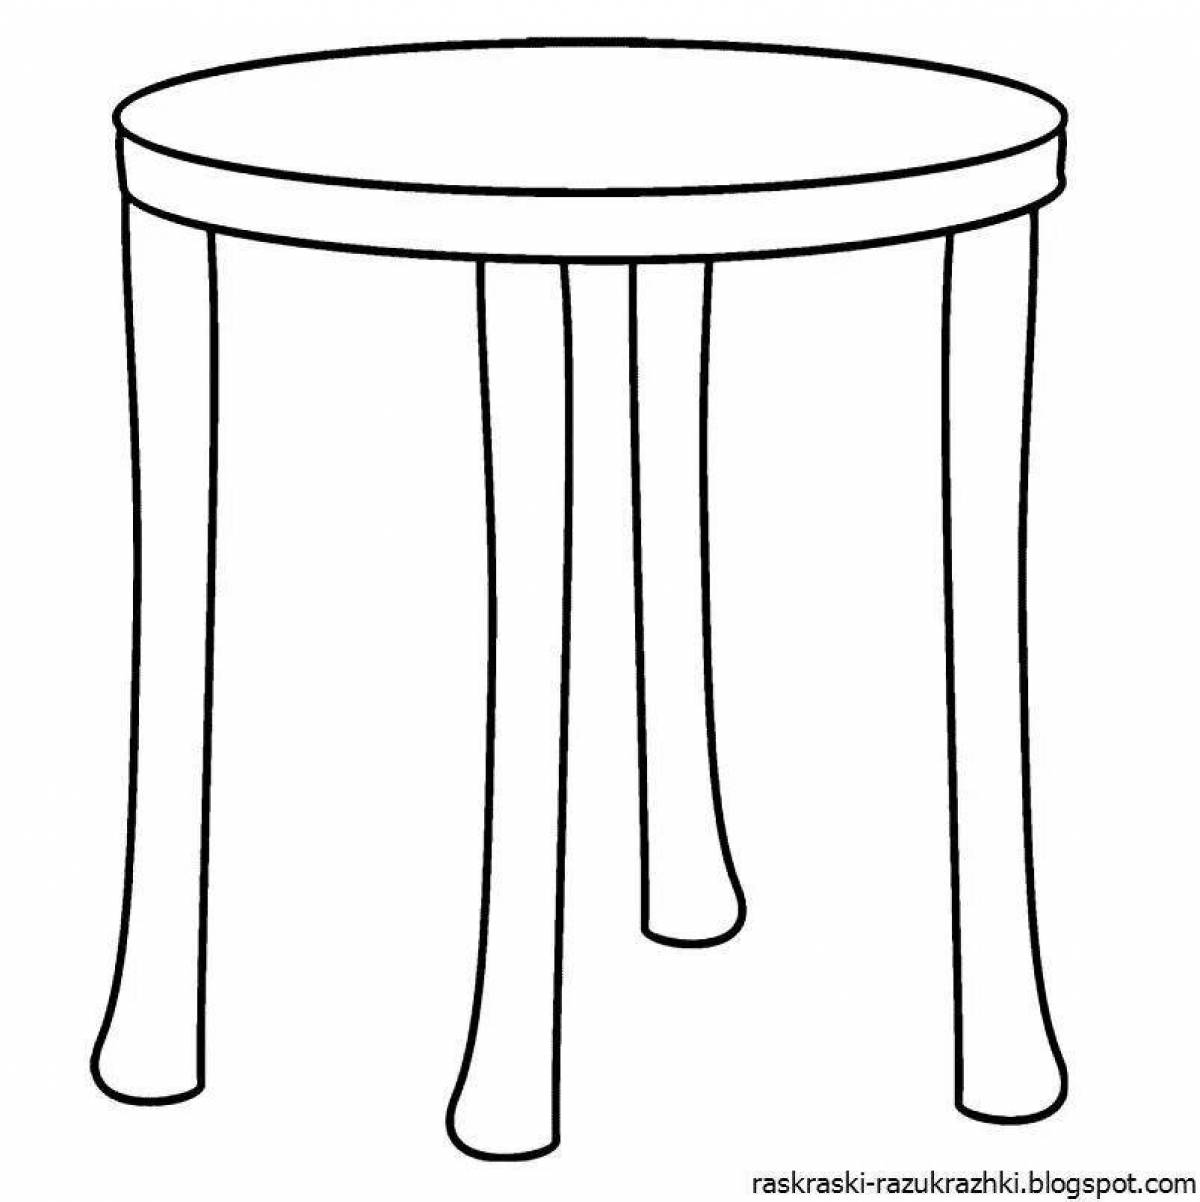 Exotic furniture coloring page